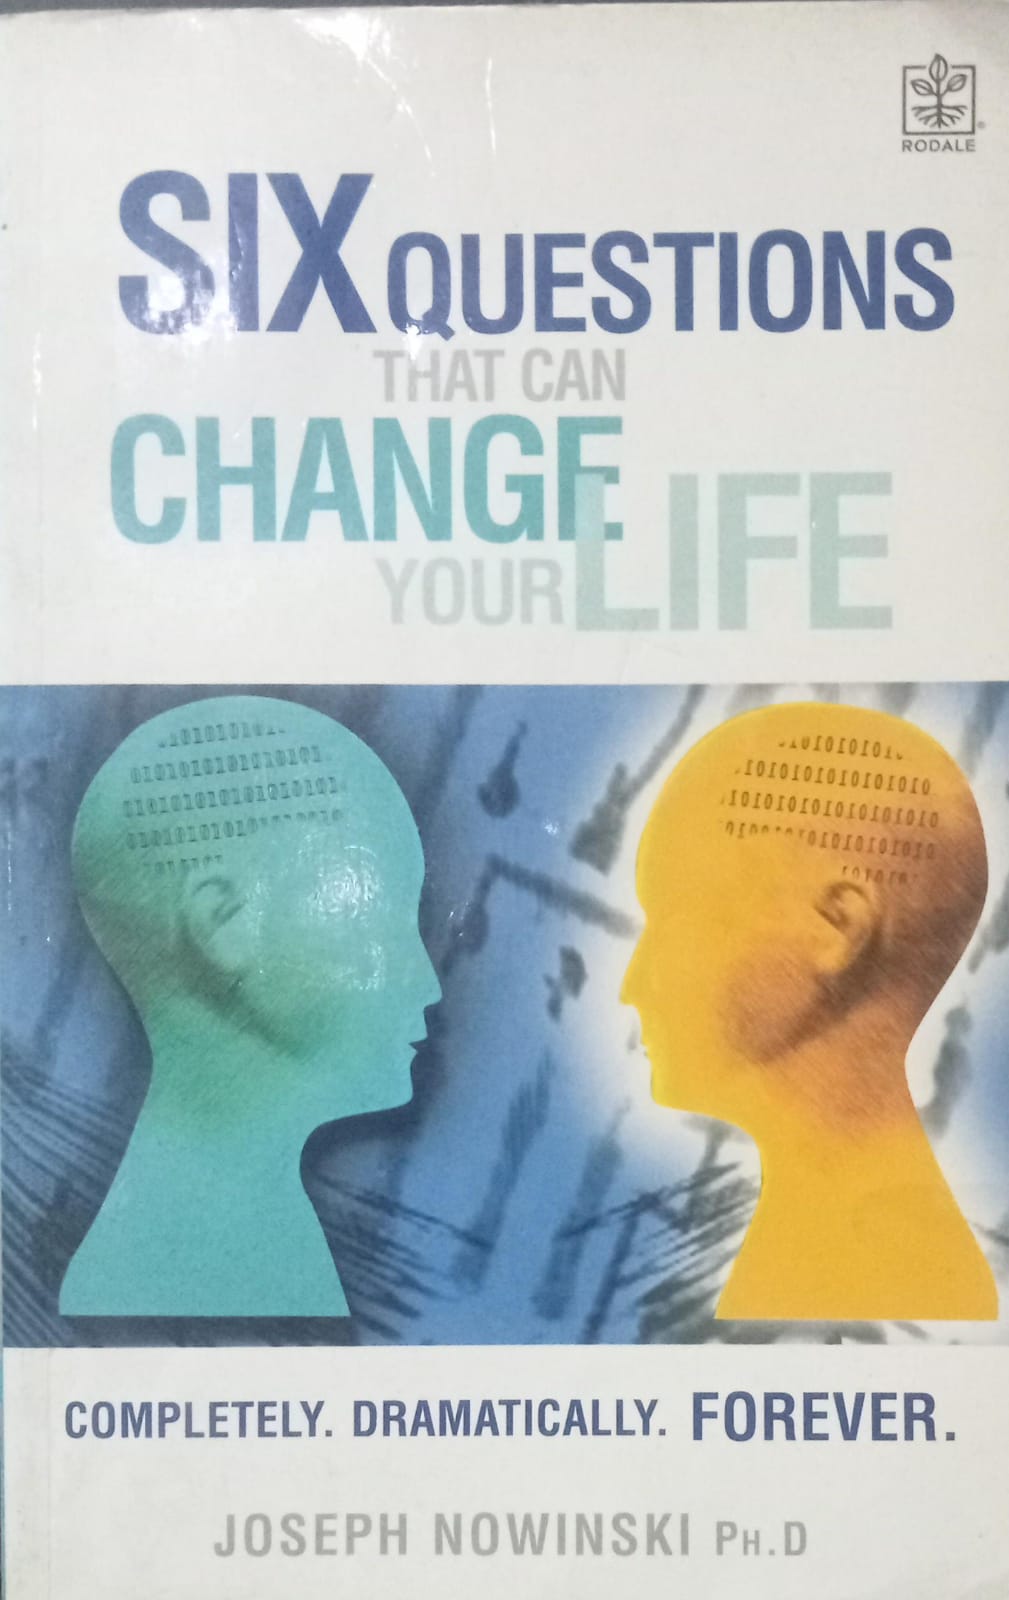 Six Questions That Can Change Your Life [RARE BOOK]